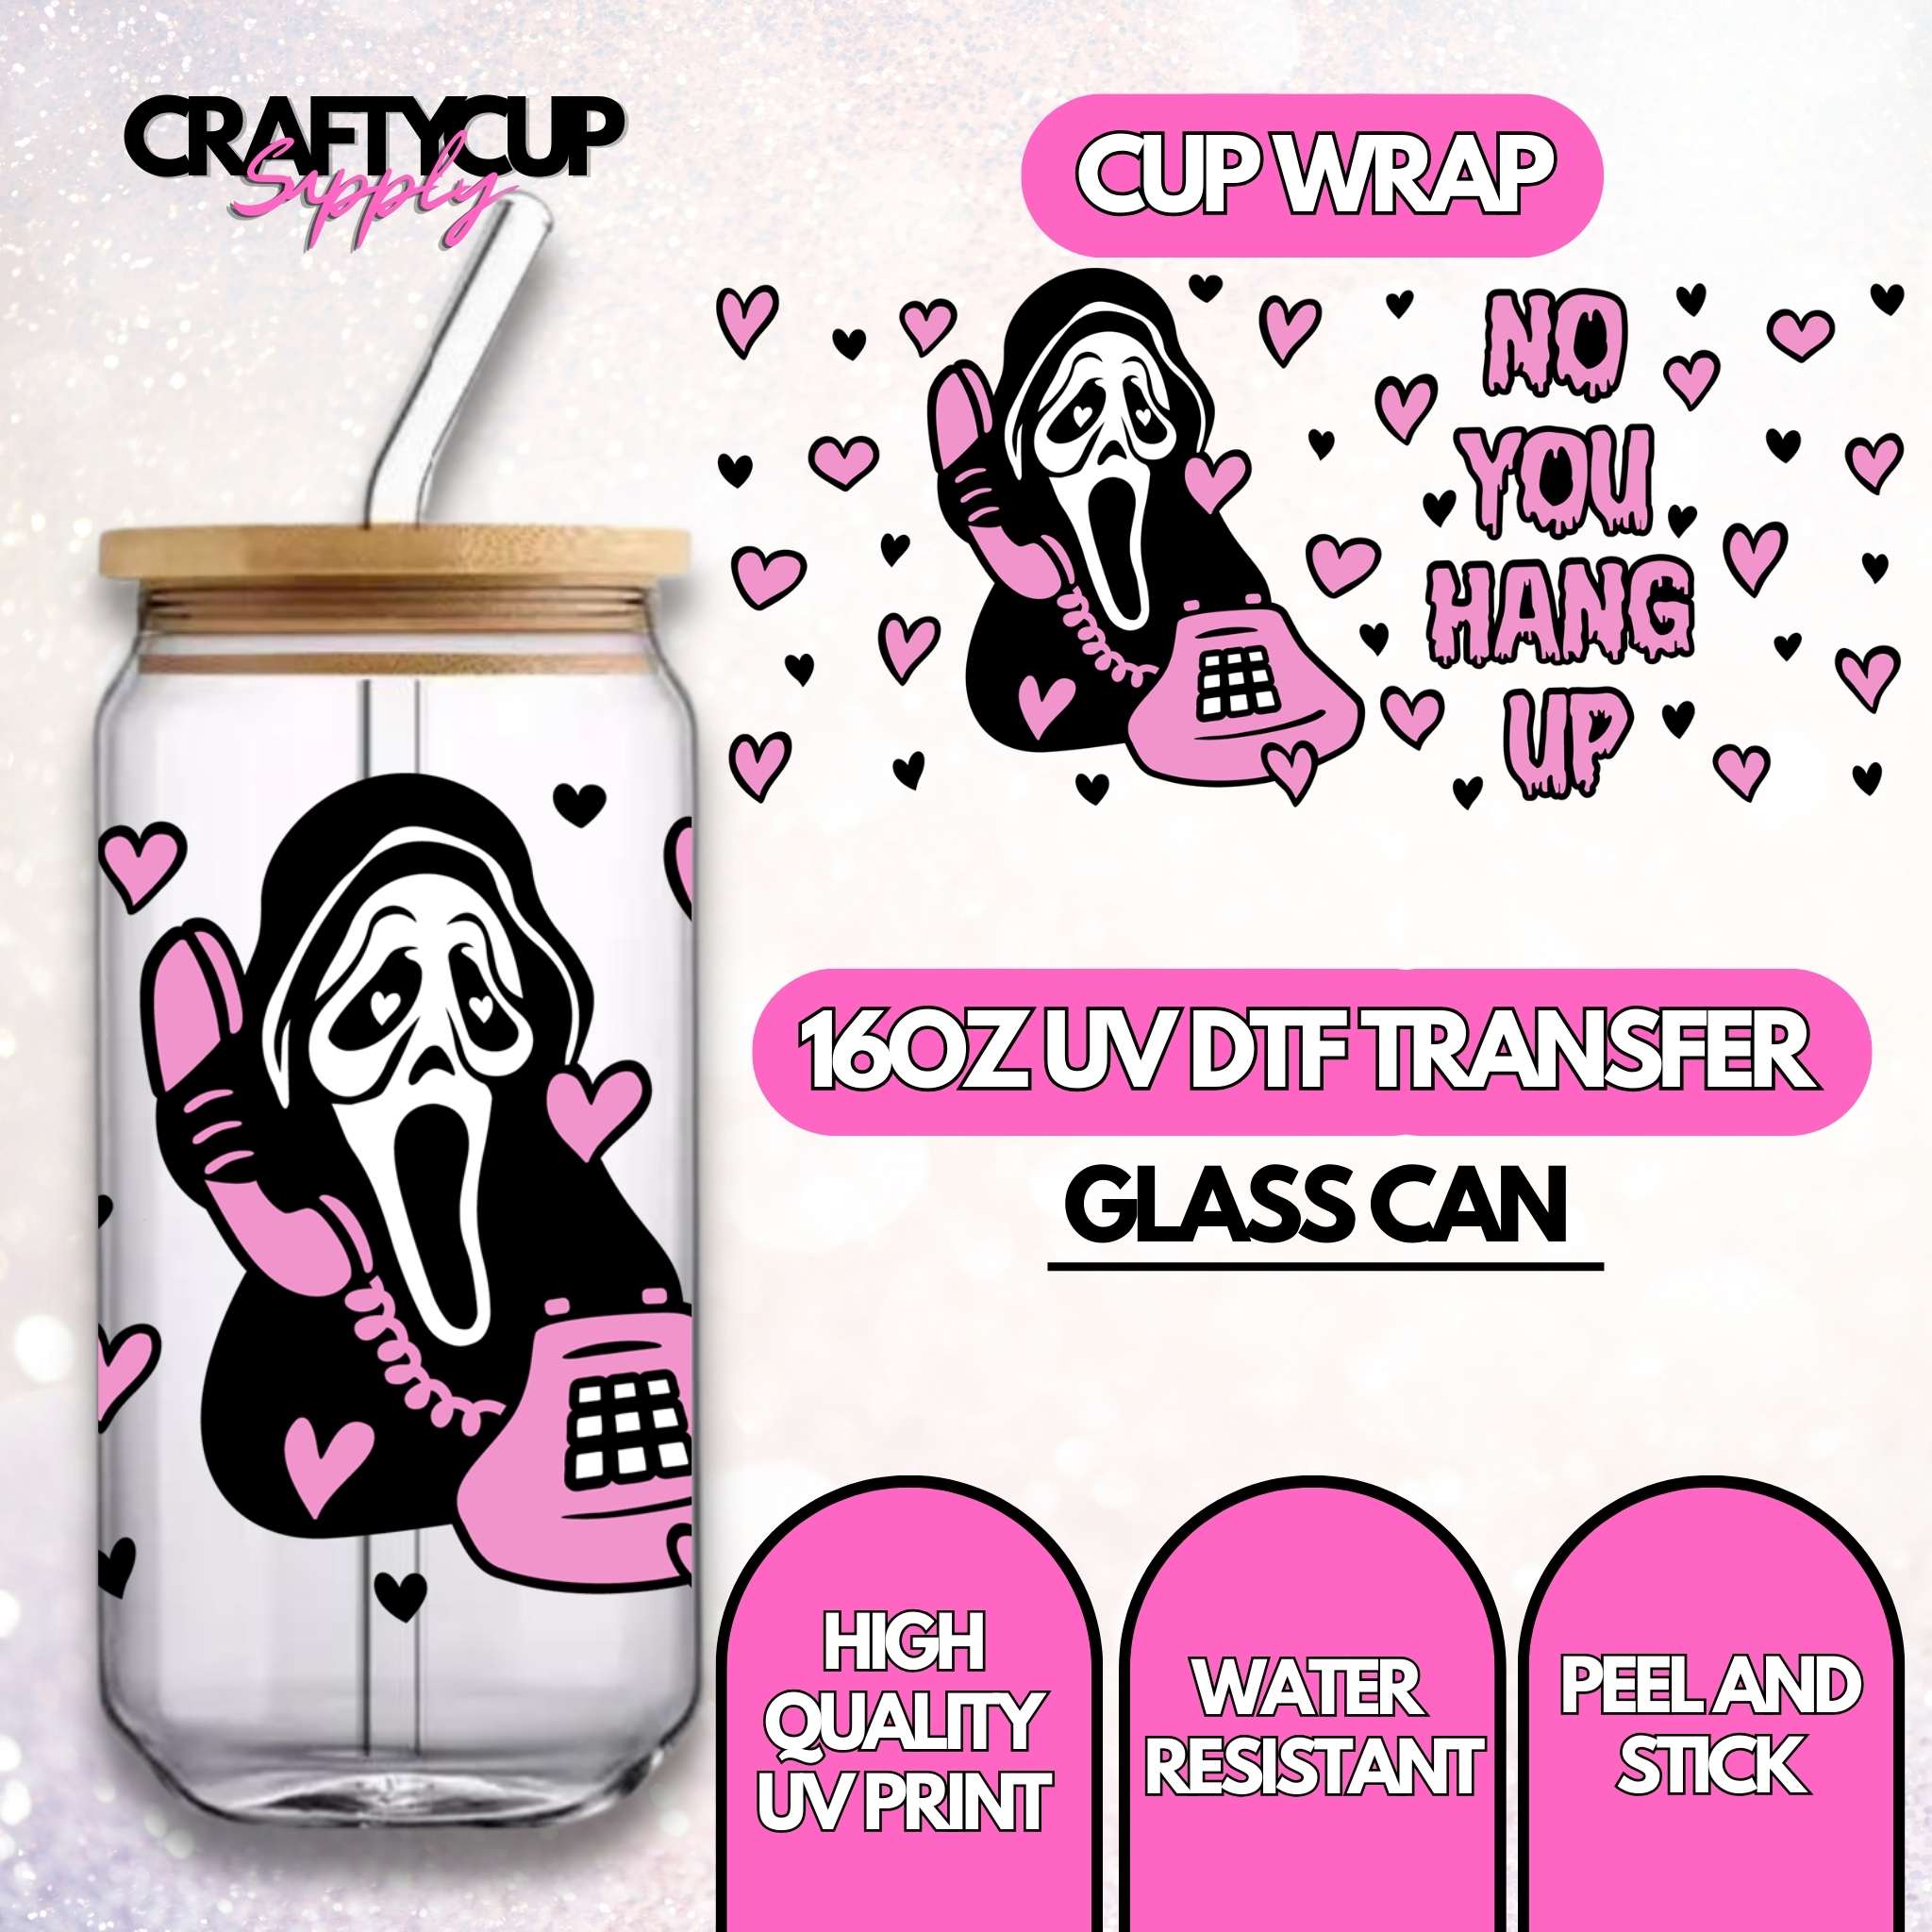 Uv dtf printer is the best choice for libbey wraps! #uvdtf